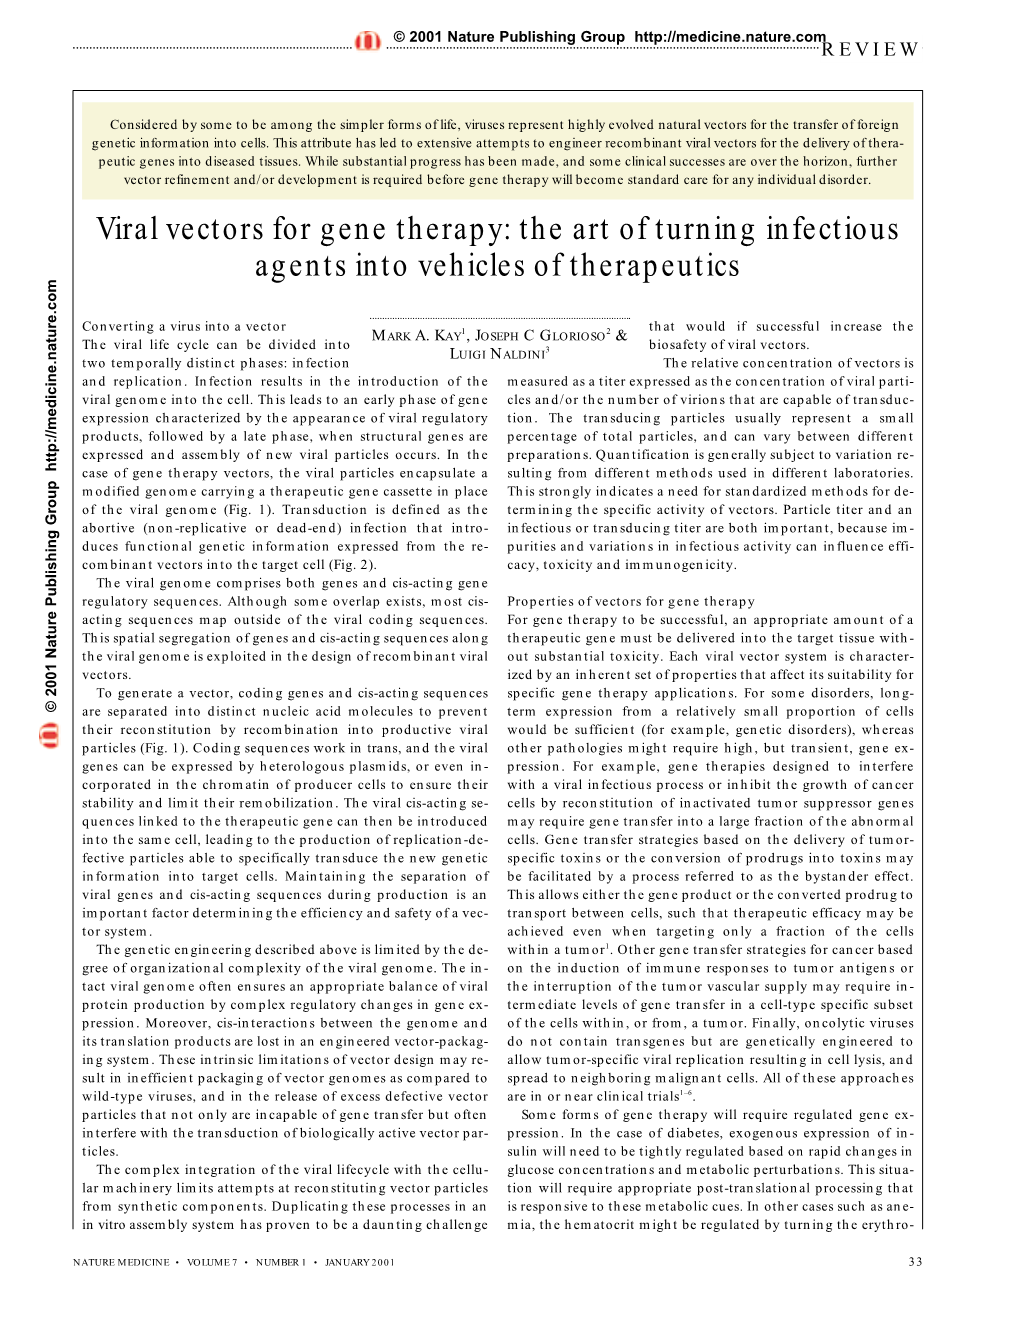 Viral Vectors for Gene Therapy: the Art of Turning Infectious Agents Into Vehicles of Therapeutics